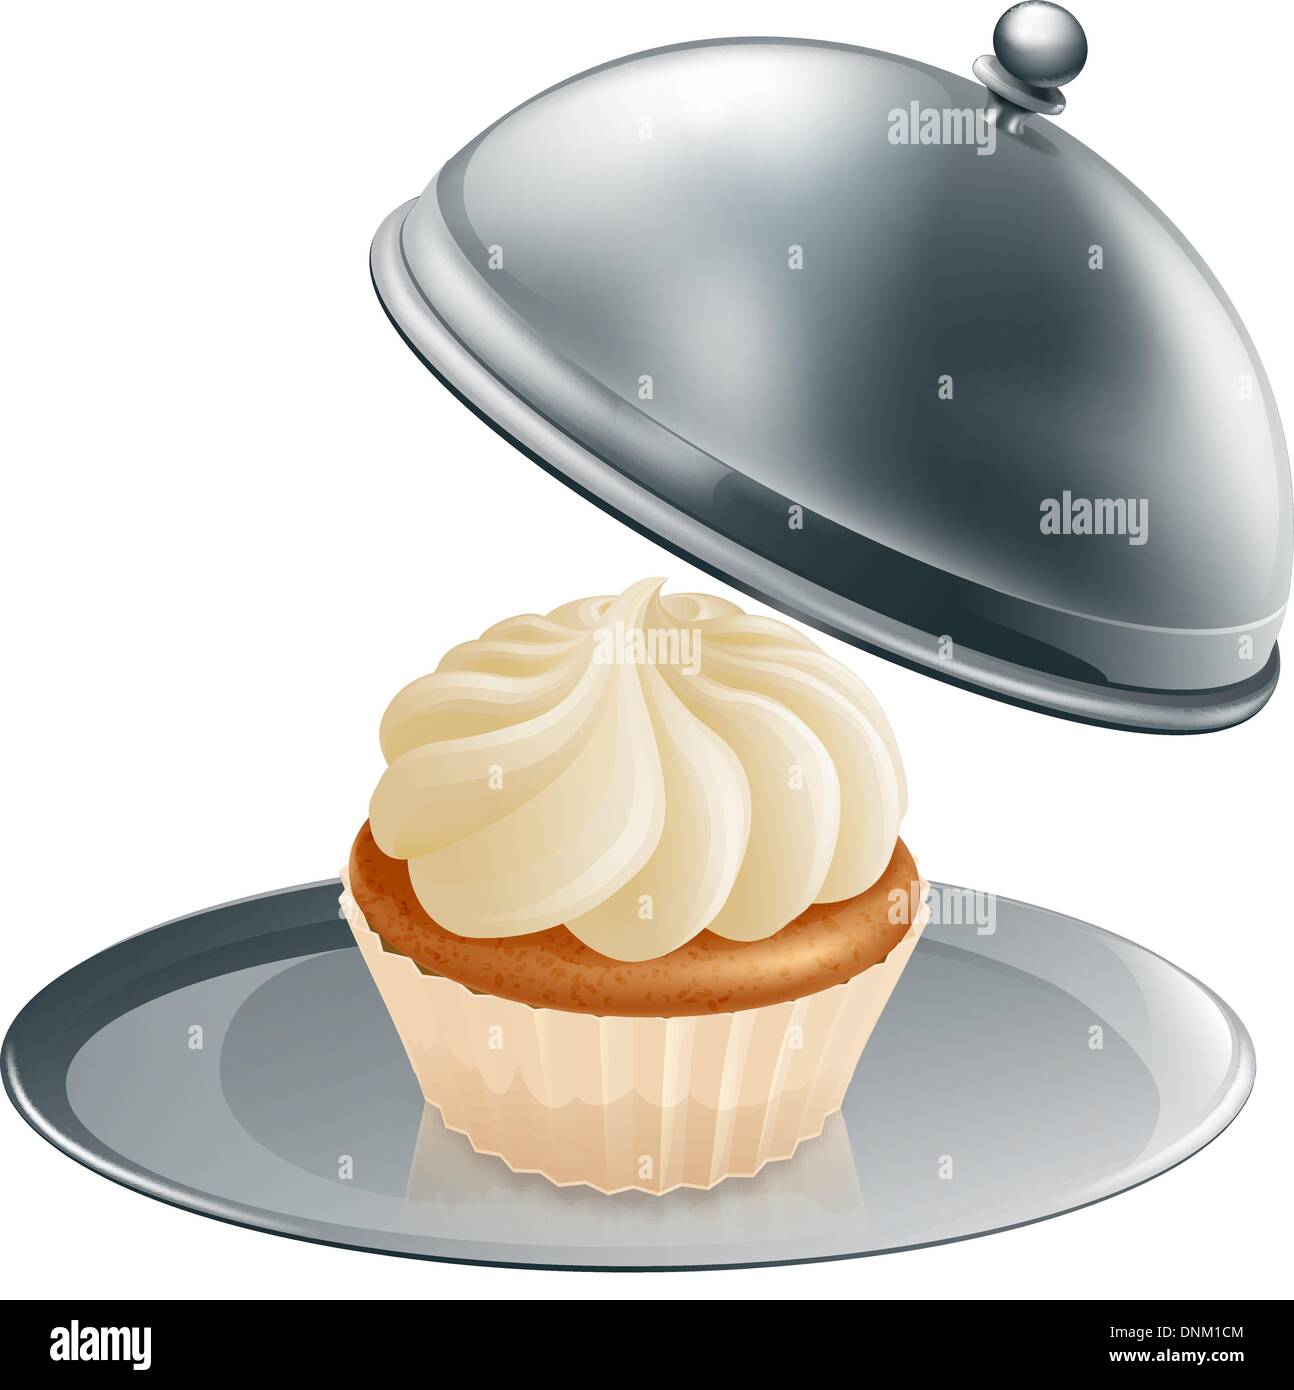 A cupcake or muffin on a silver platter, concept could be for gourmet baking or a special treat during a diet. Stock Vector